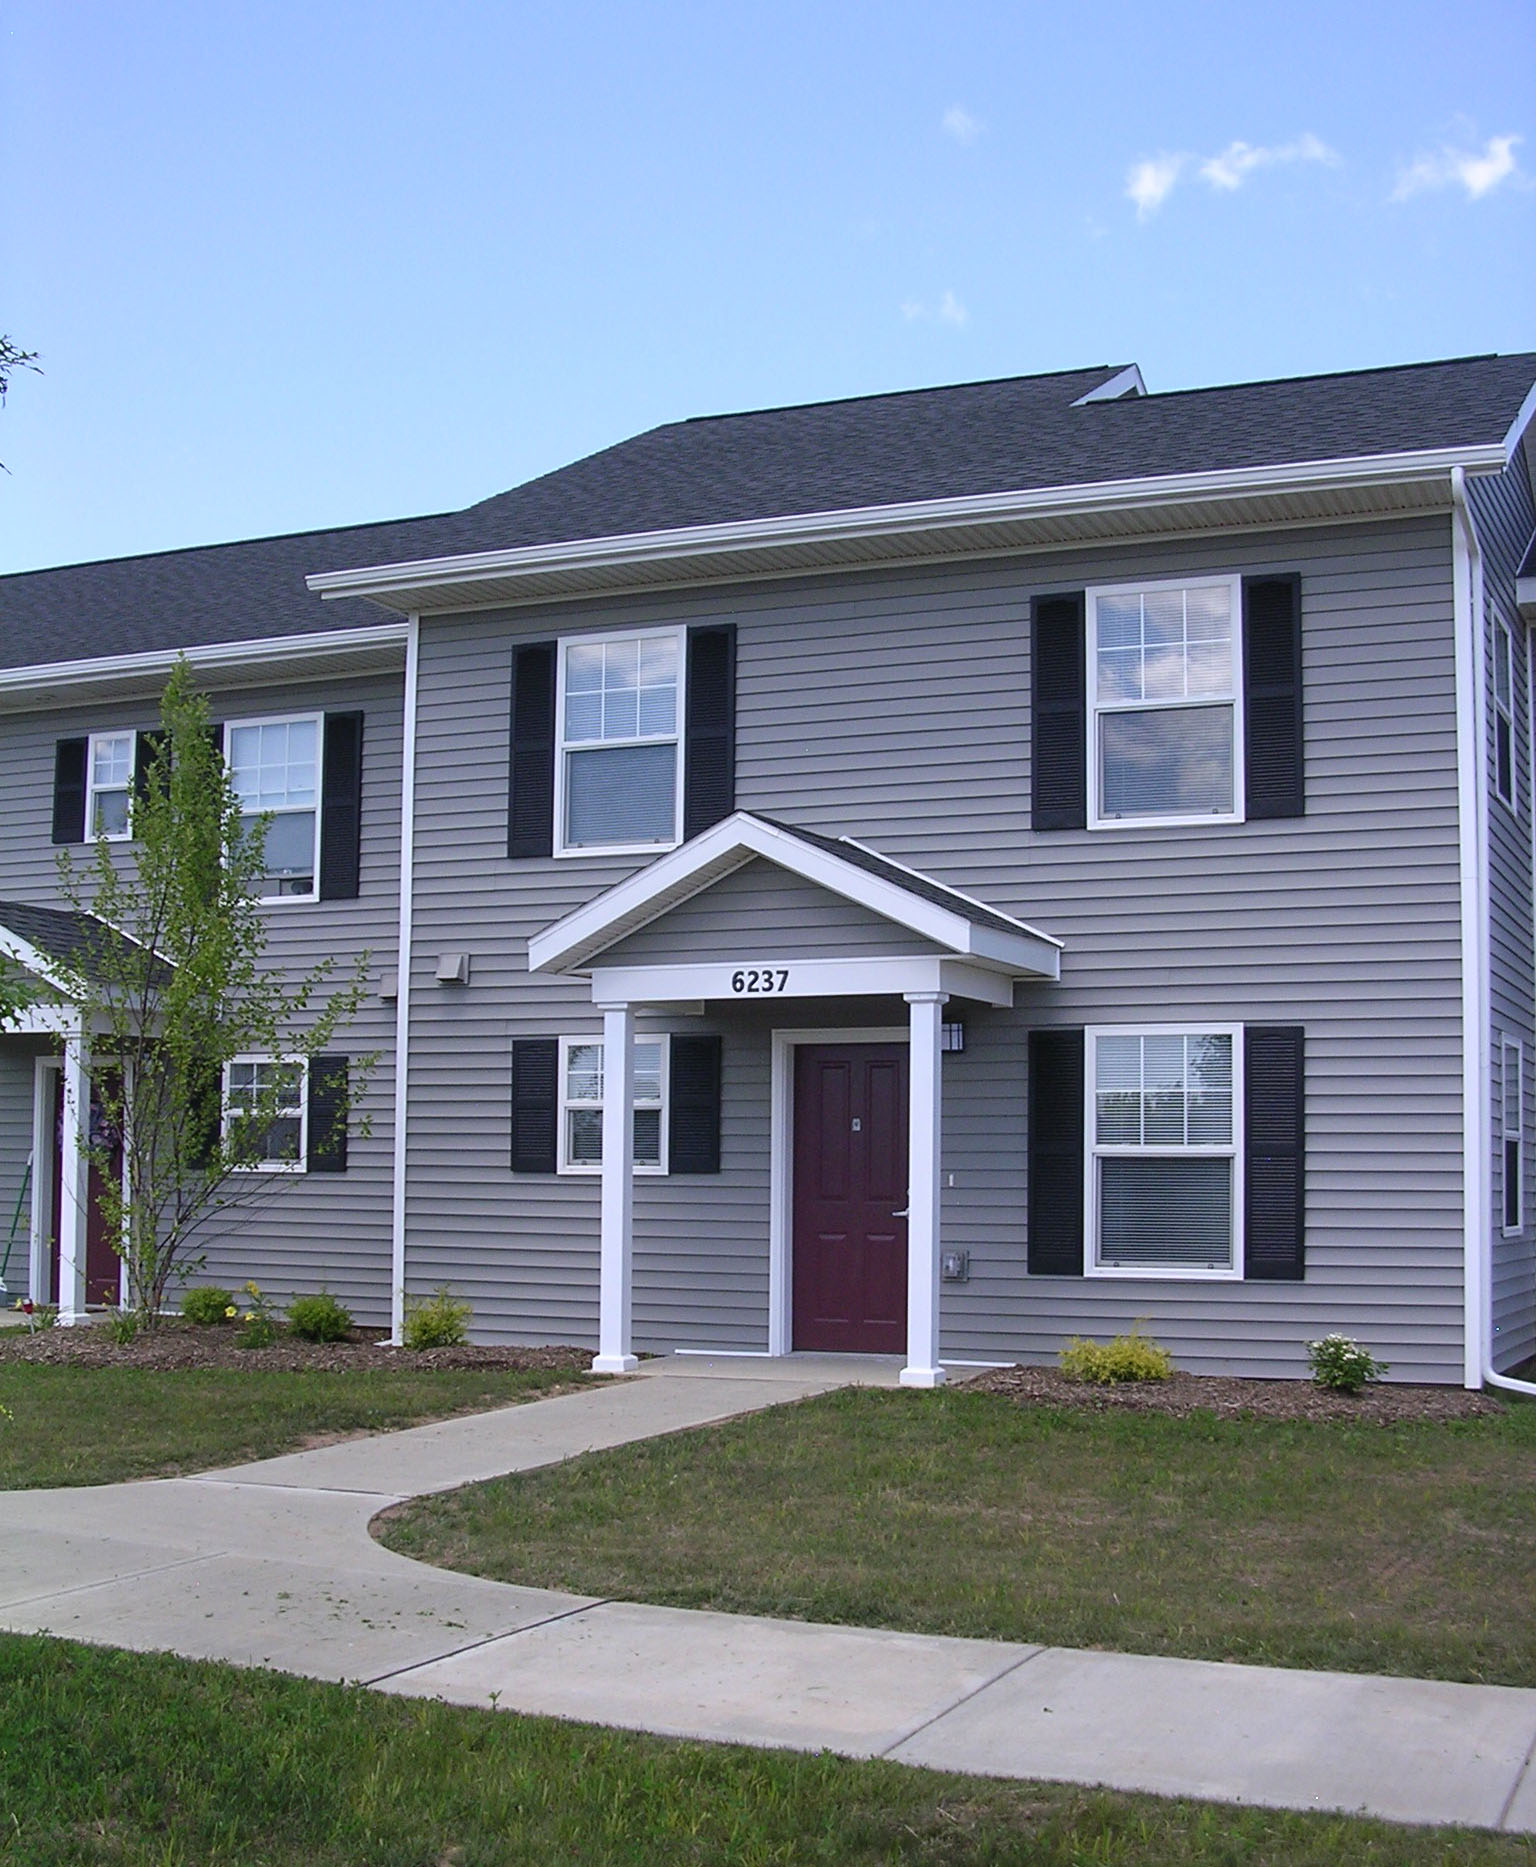 property management company client list syracuse ny front view image of island hollow townhouses